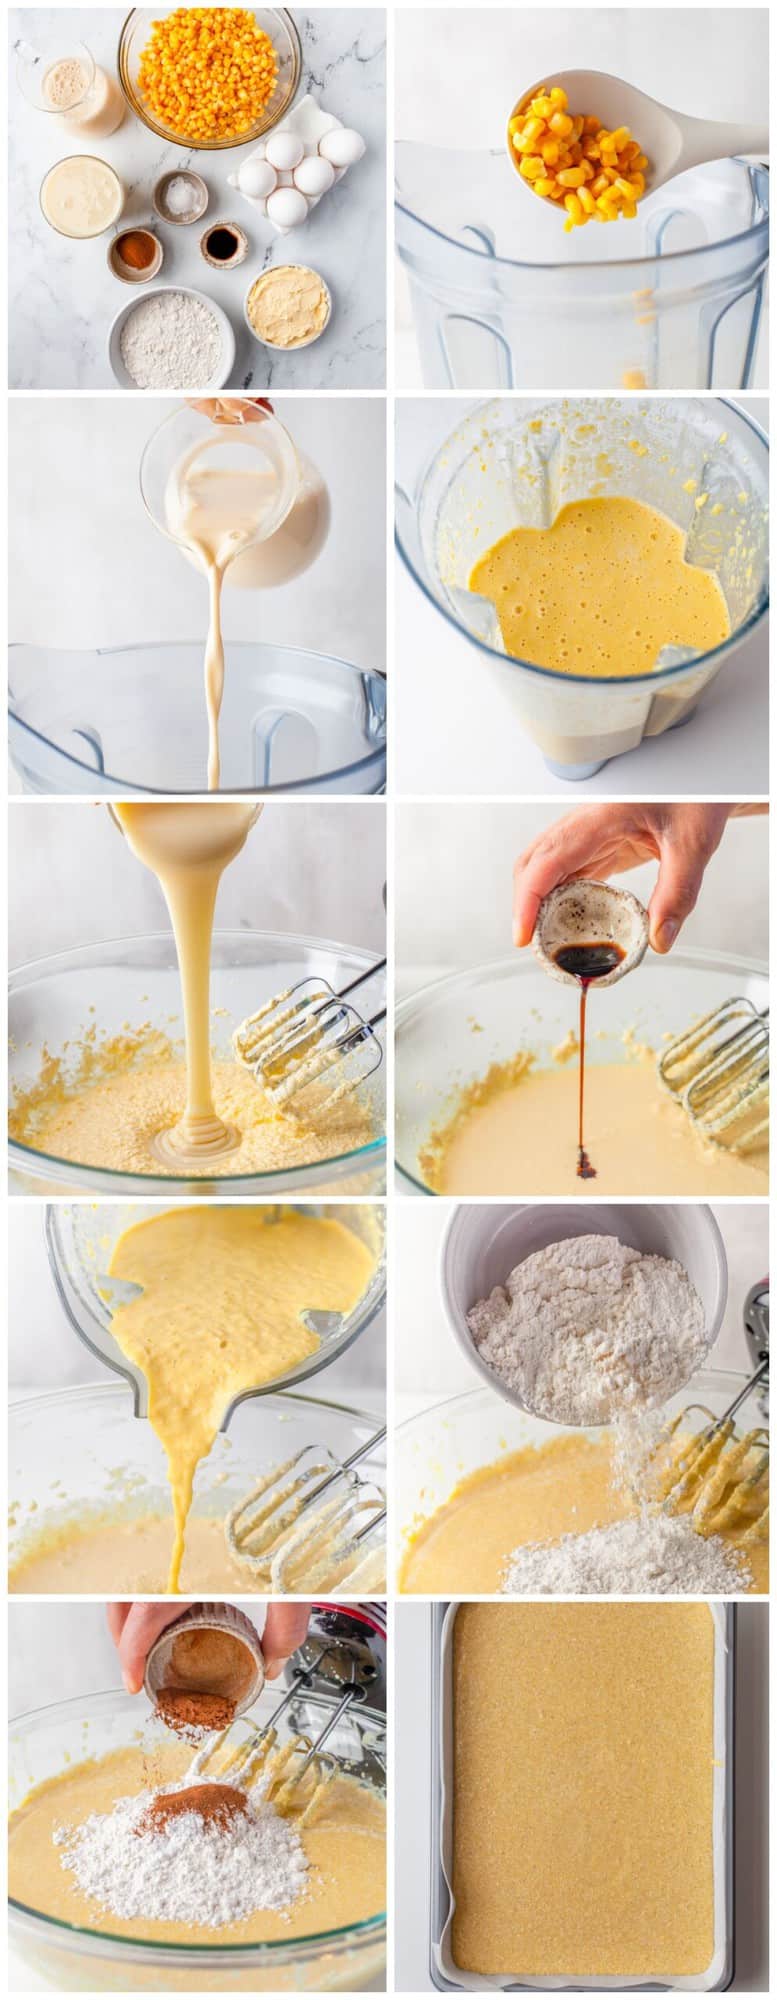 step by step photos for how to make cornbread